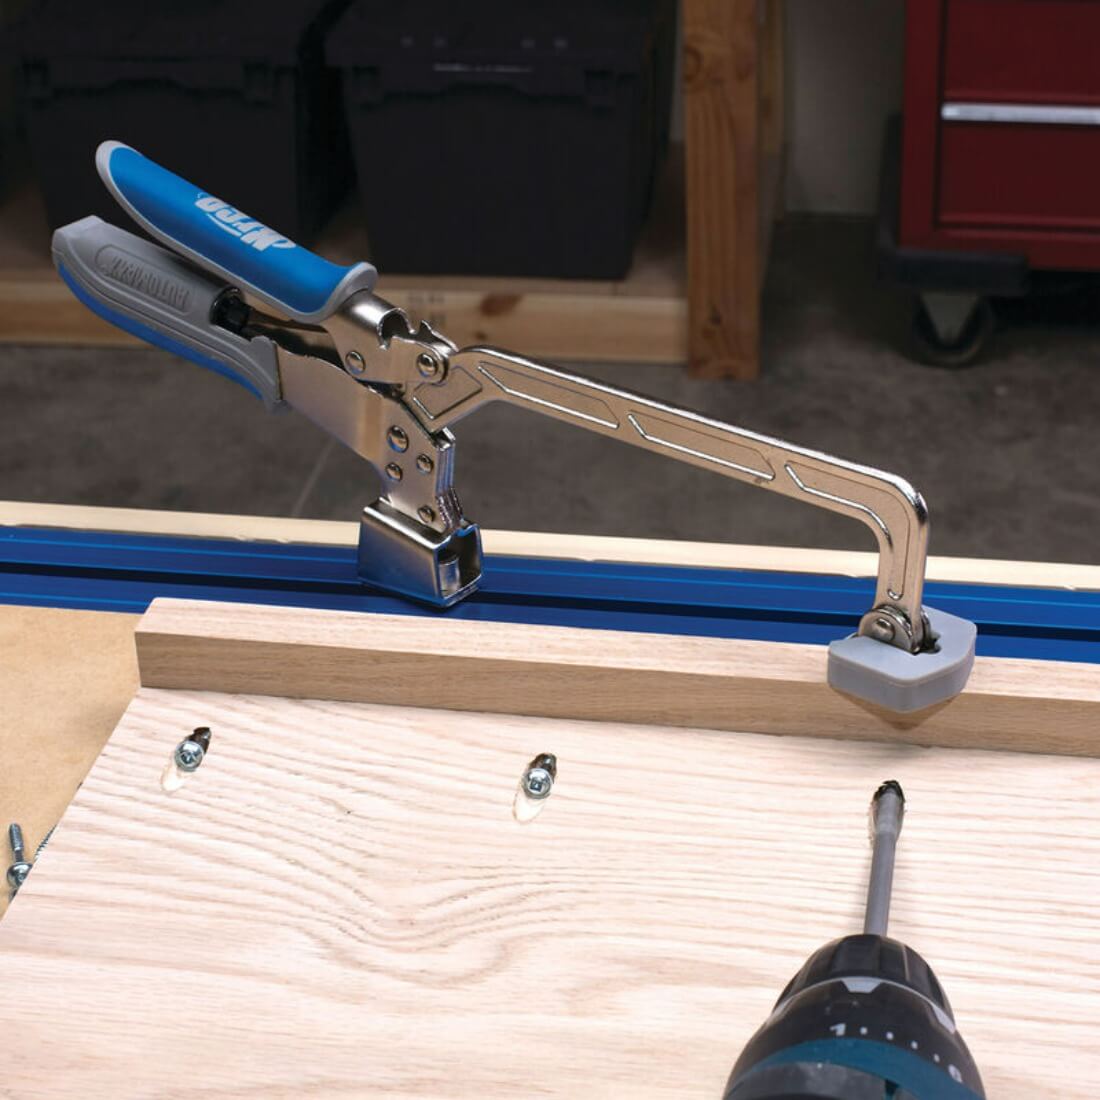 Kreg Automaxx 6 inch Bench Clamp shown in bench rail clamping a wooden frame